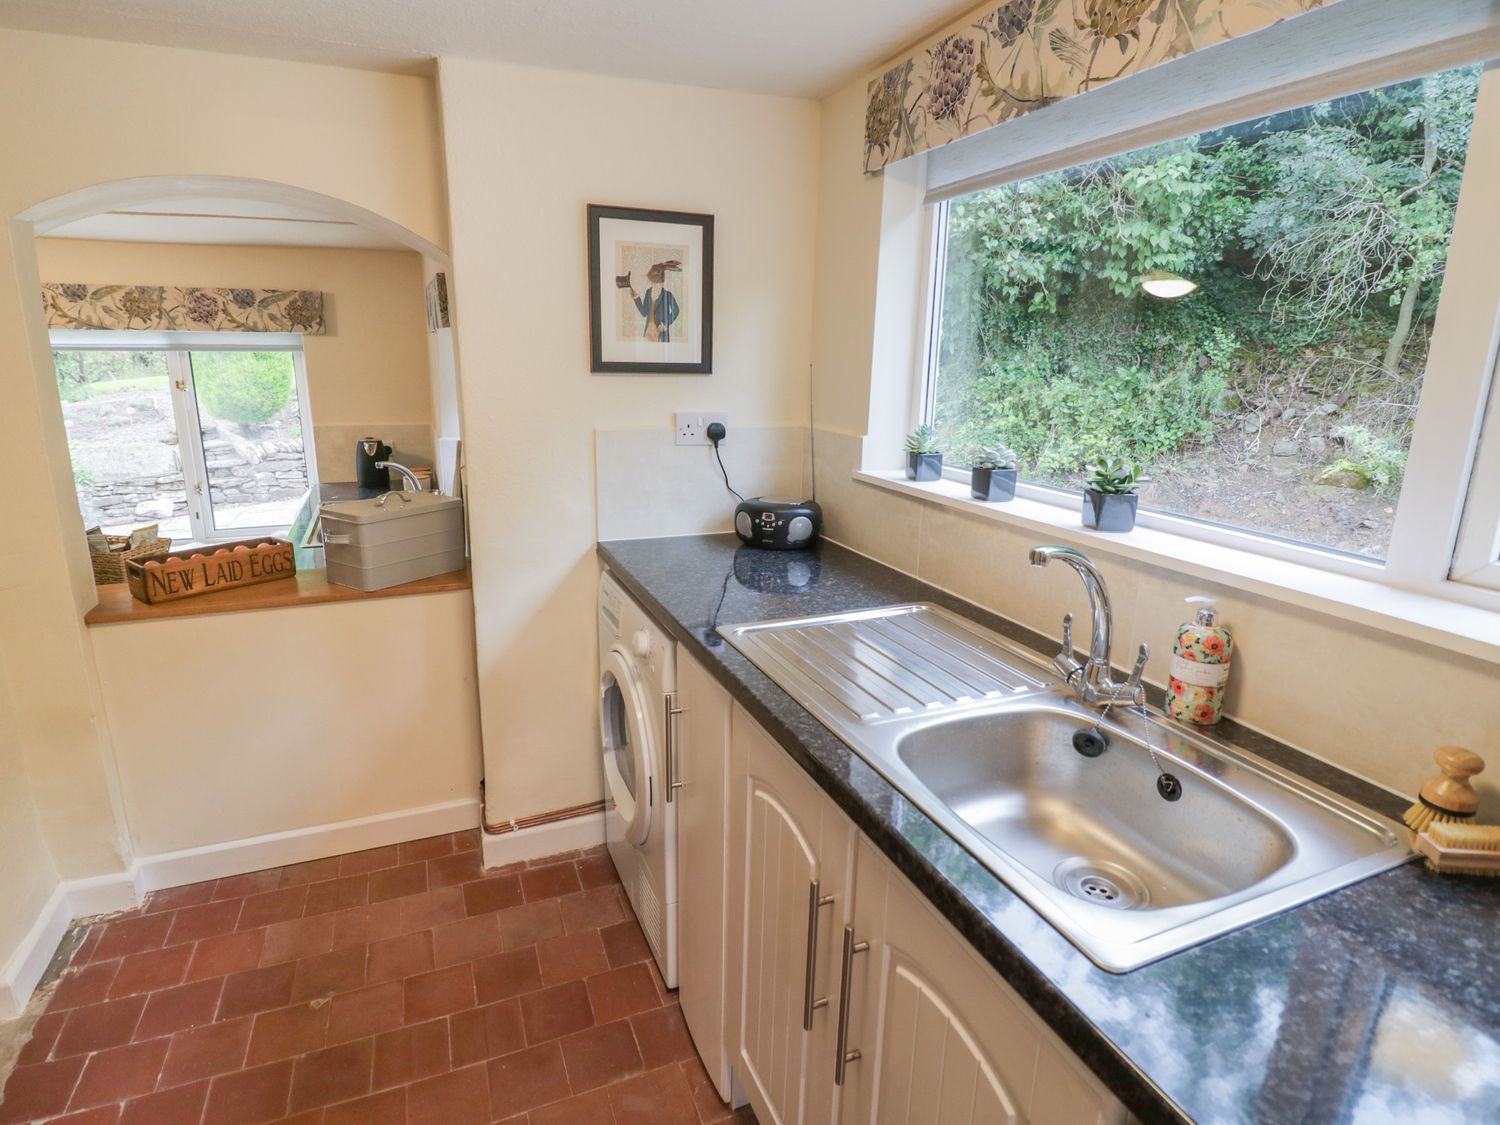 Grove Cottage near Leominster, Herefordshire. Two bedrooms. Detached farmhouse. Rural position. WiFi